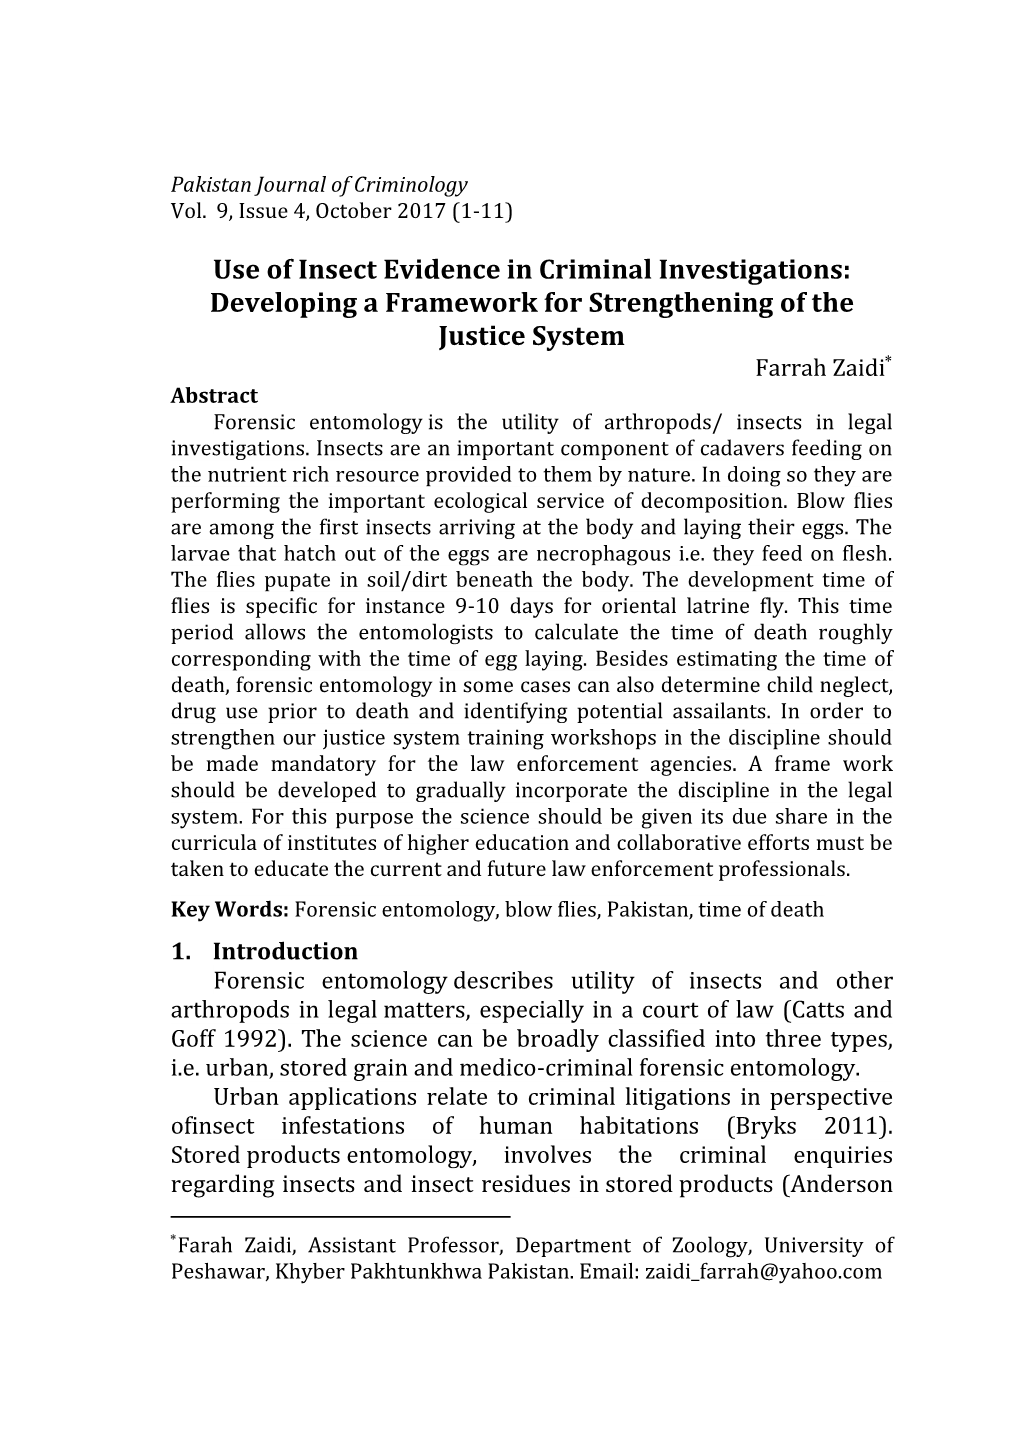 Use of Insect Evidence in Criminal Investigations